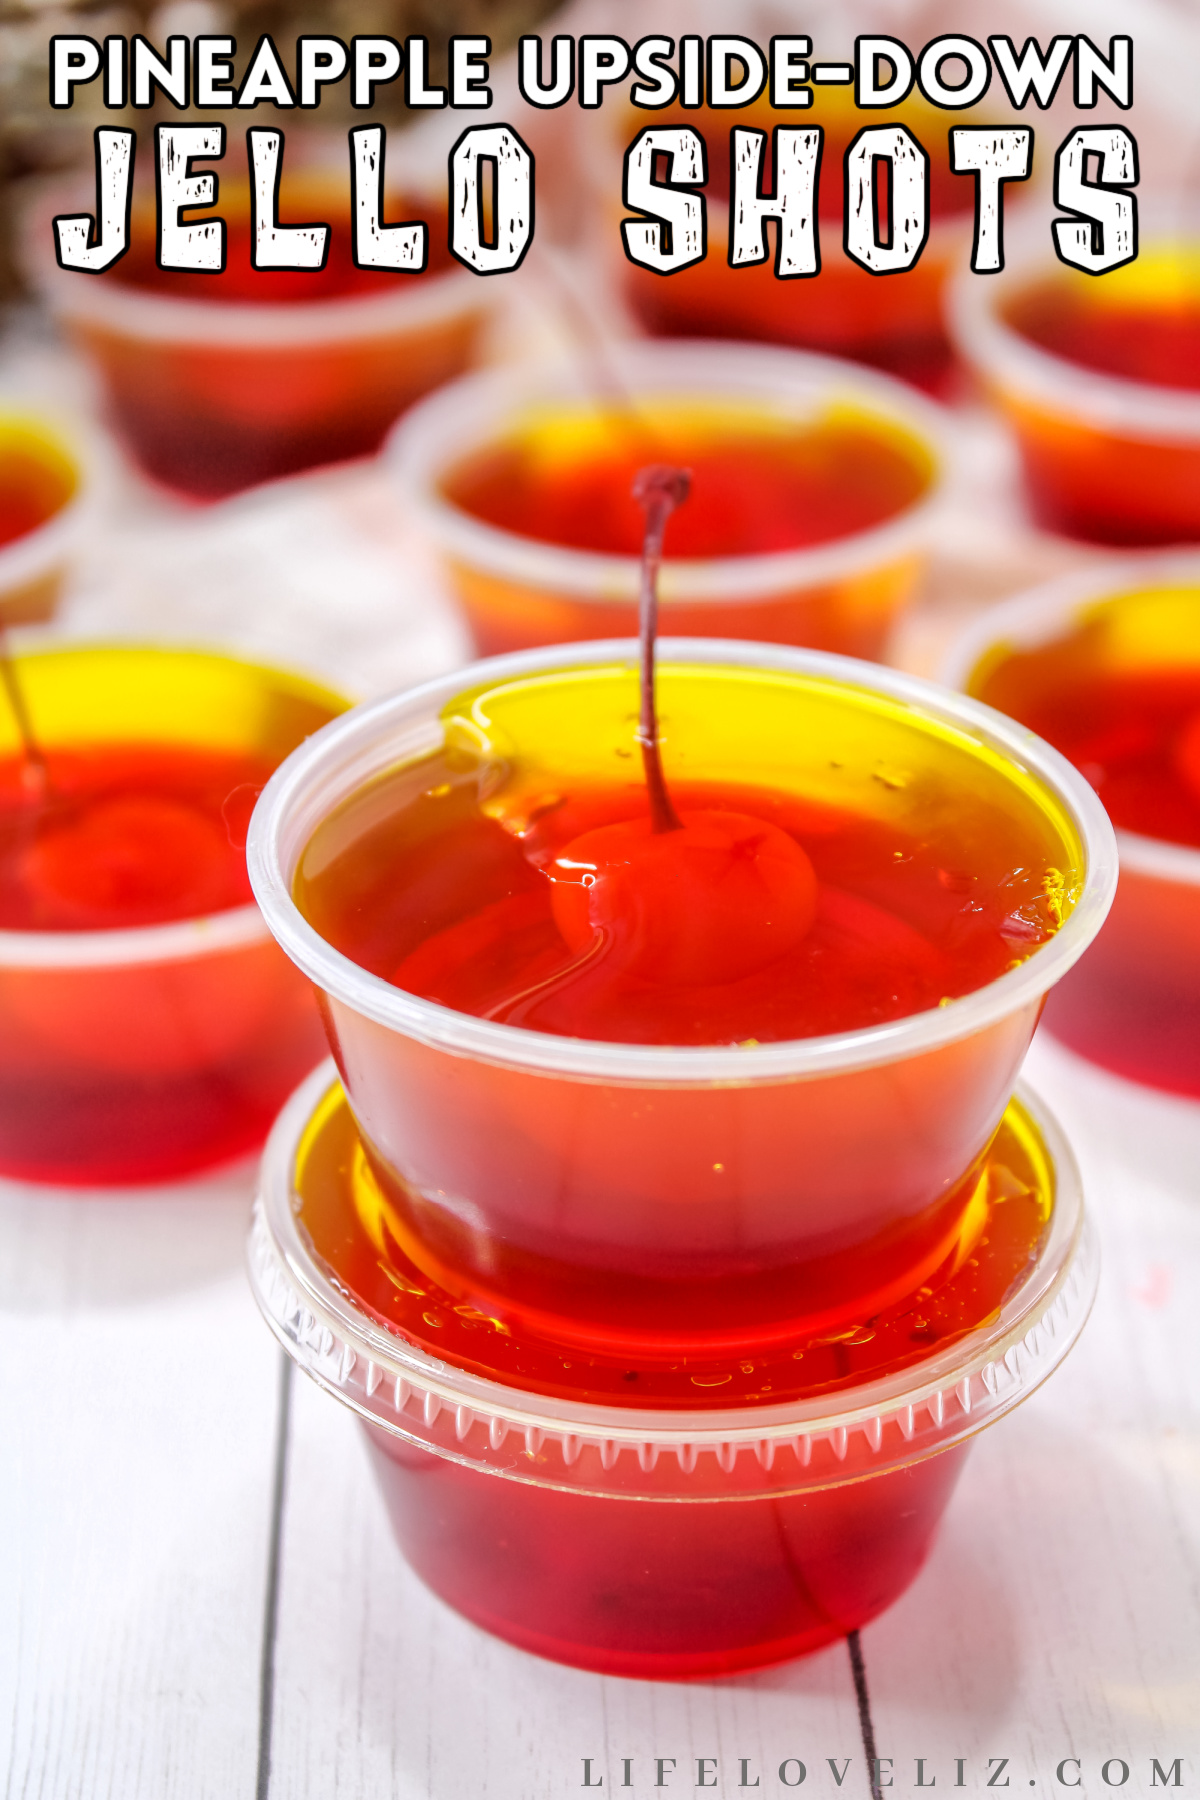 These pineapple upside-down jello shots are a take on traditional pineapple upside down cakes. They're perfect for any party or get together!